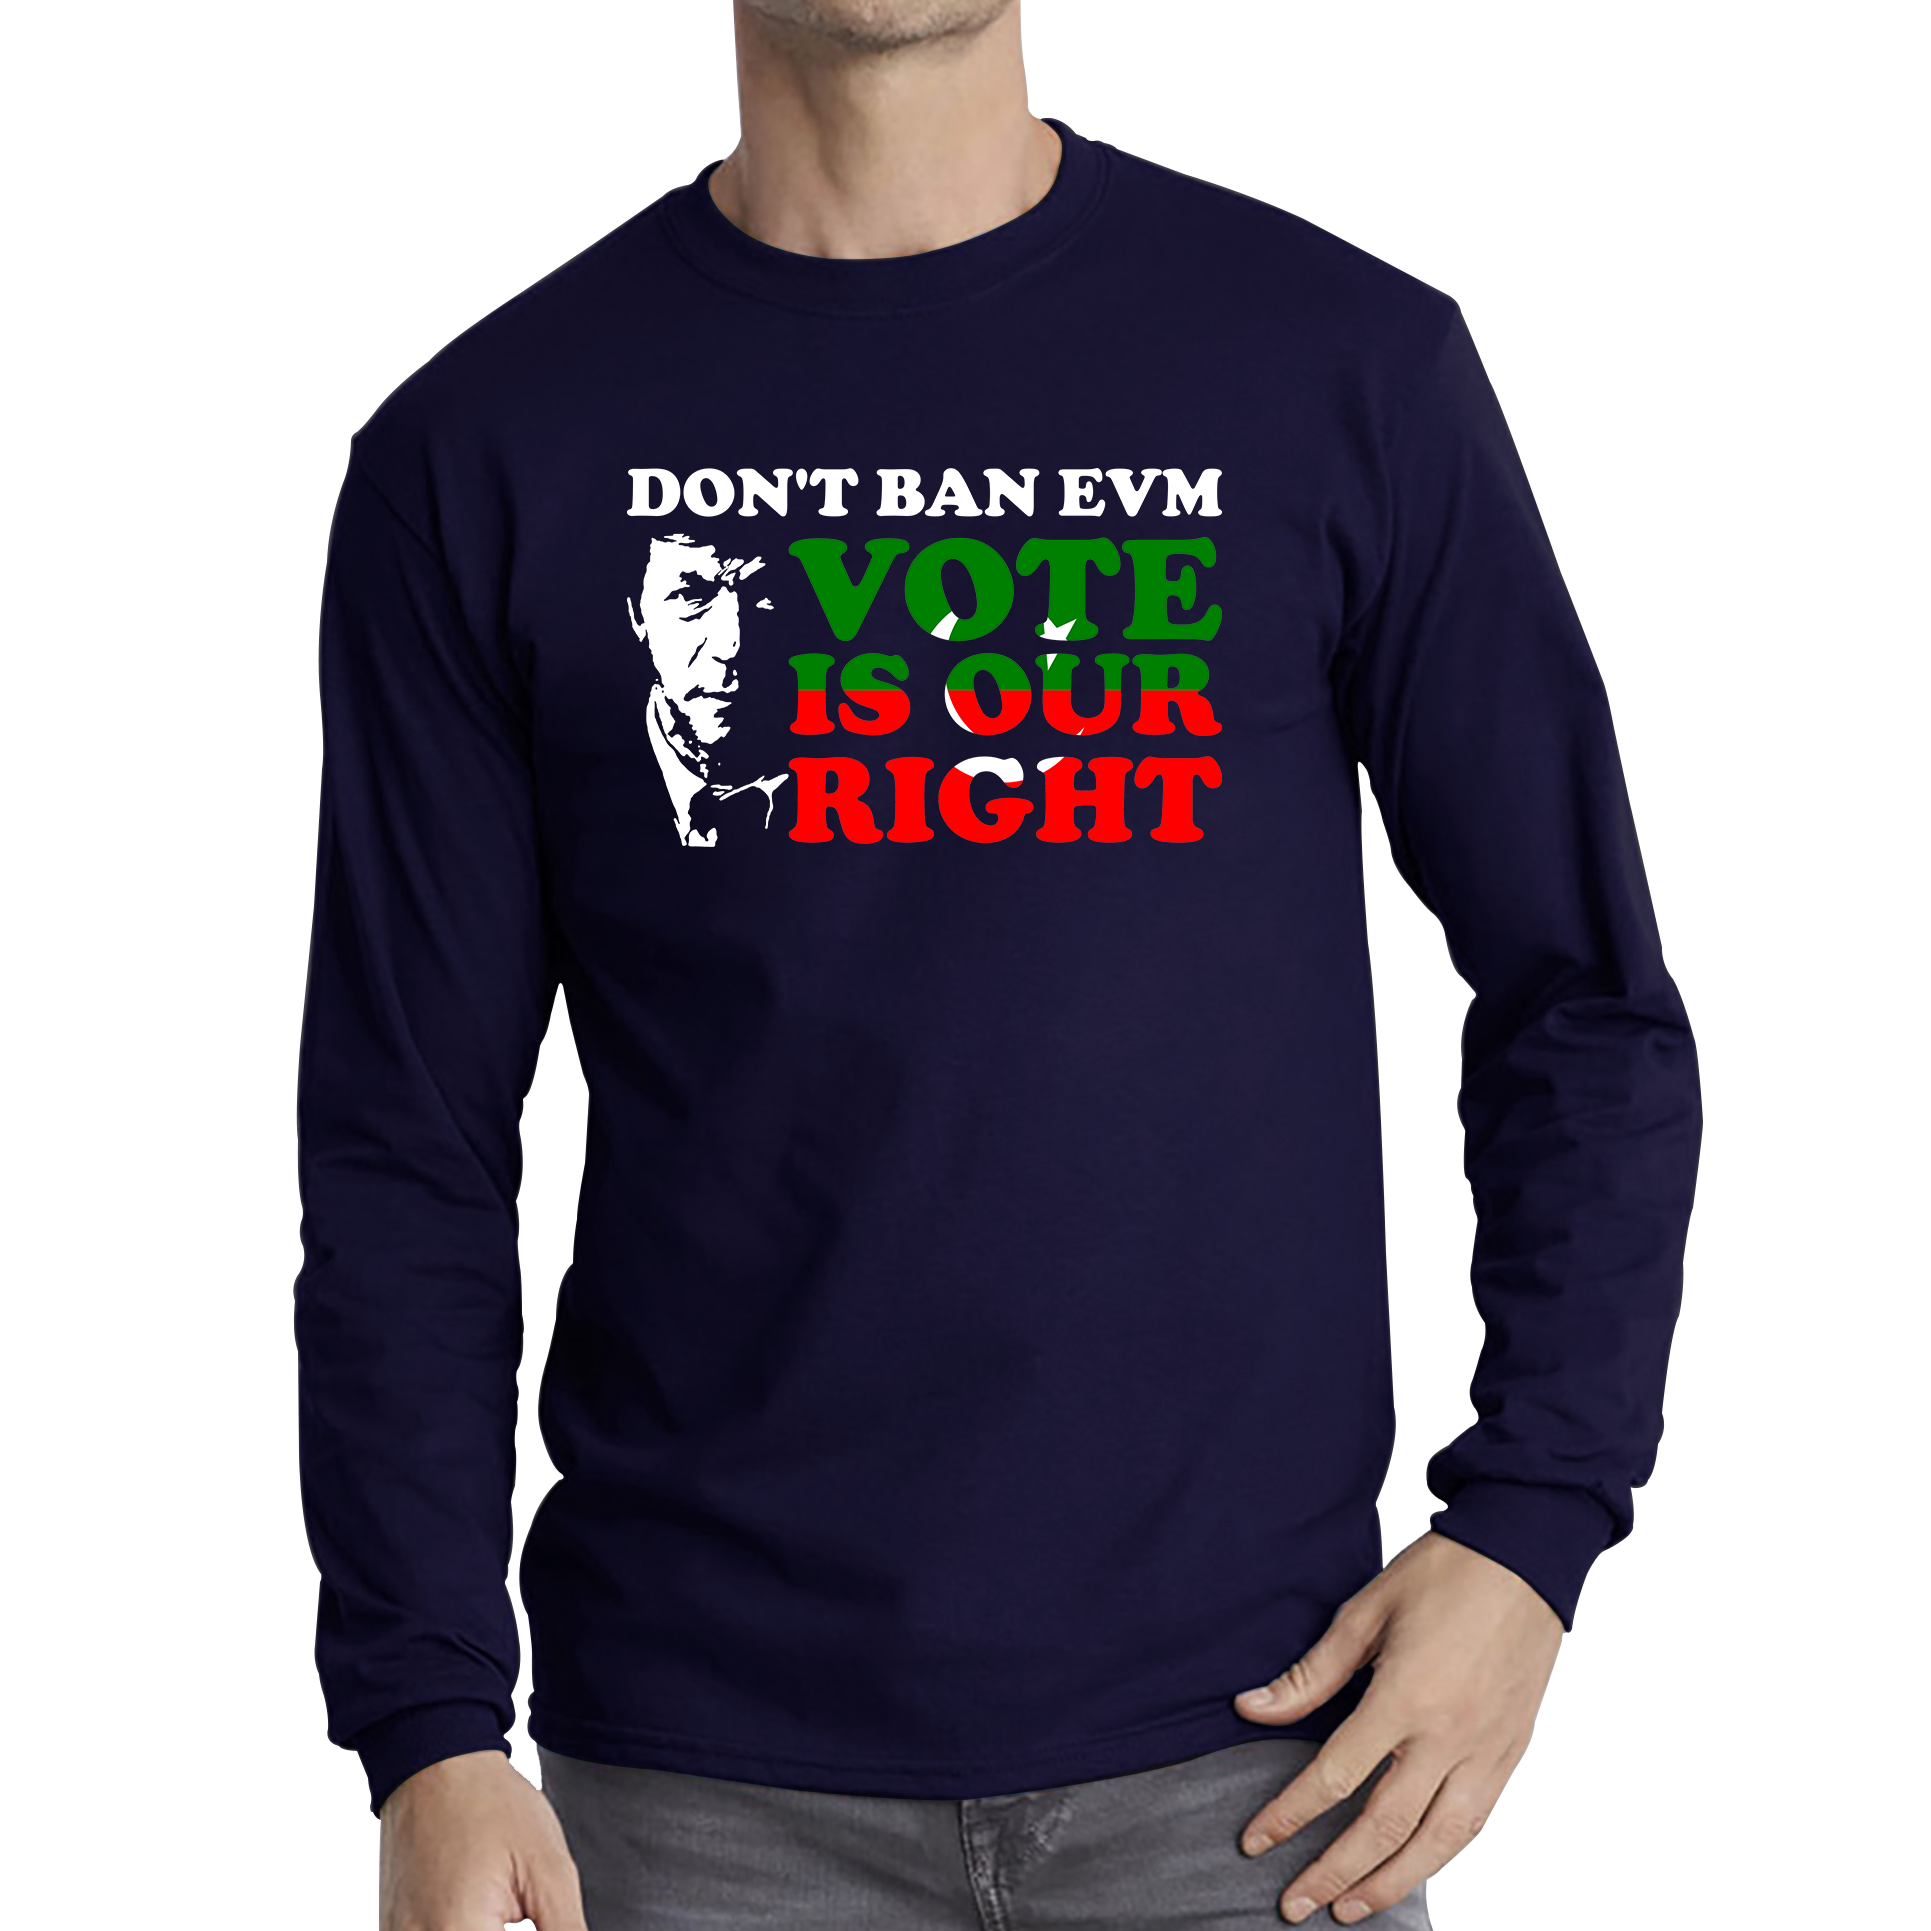 Don't Ban EVM Vote Is Our Right Imran Khan PTI Pakistani Politician Long Sleeve T Shirt